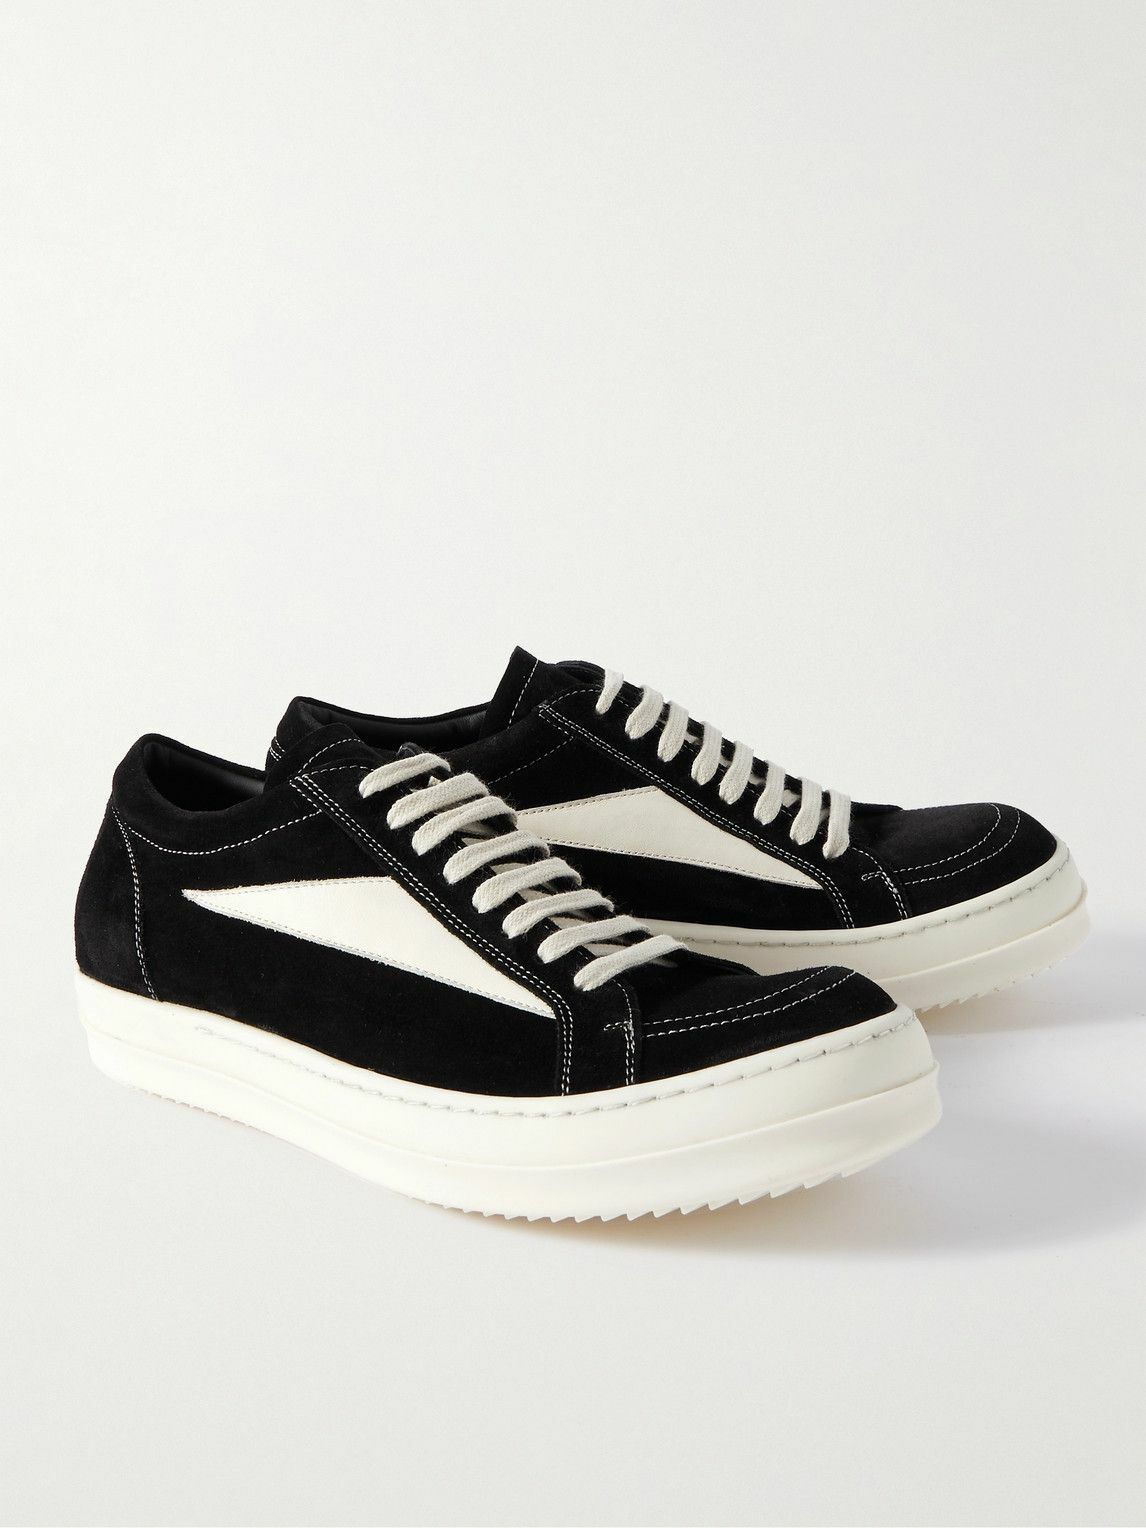 Rick Owens - Leather-Trimmed Suede Sneakers - Black